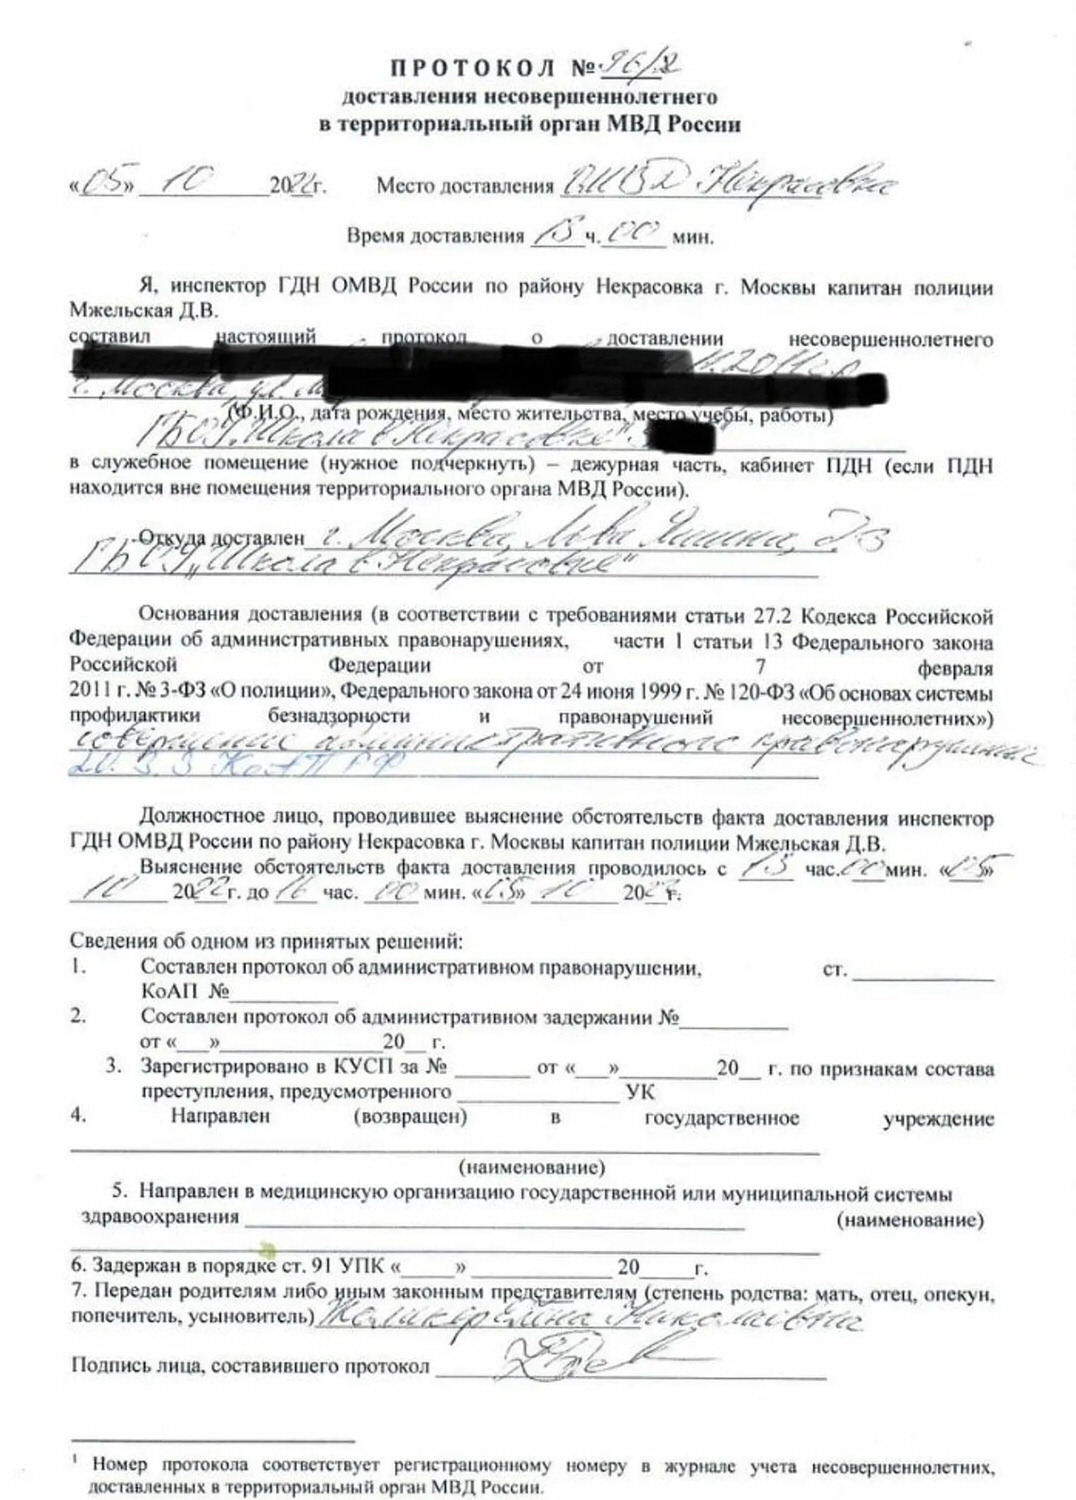 Protocol of investigation, a legal document